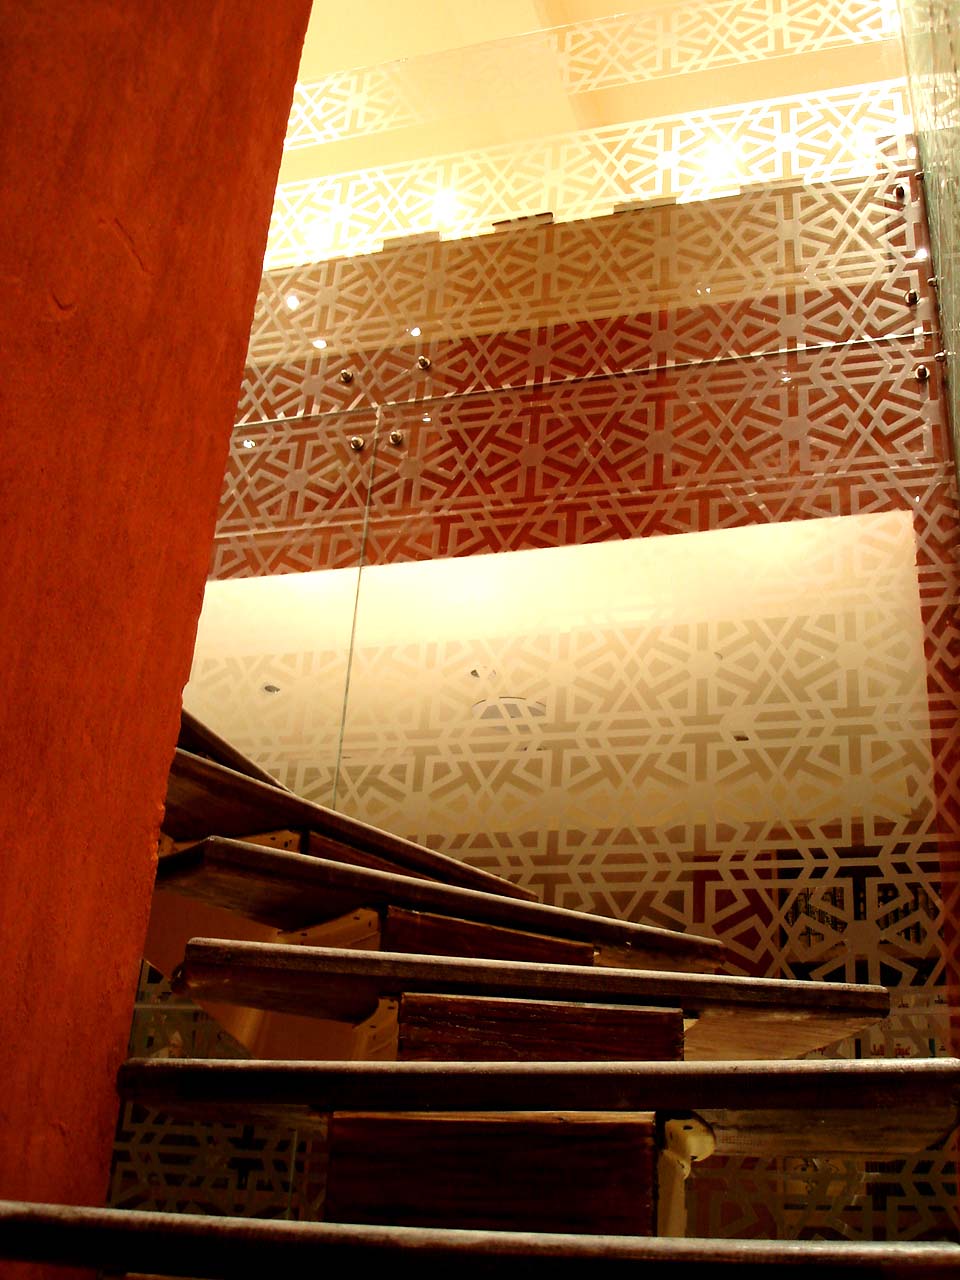 

<div style=color:#000>Location:Al-Zamalek, Cairo 
               Year:2010
               Status:Completed </div>
 The interior design theme is a continuation of the andalusian style that characterizes the bookstore chain. In this branch, which stretches over 2 floors, a central wooden staircase spiraling inside an illuminated glass cube lightens up the whole space beneath and connects both floors while it acts as a generator for chance encounters by remaining in a state of constant flux